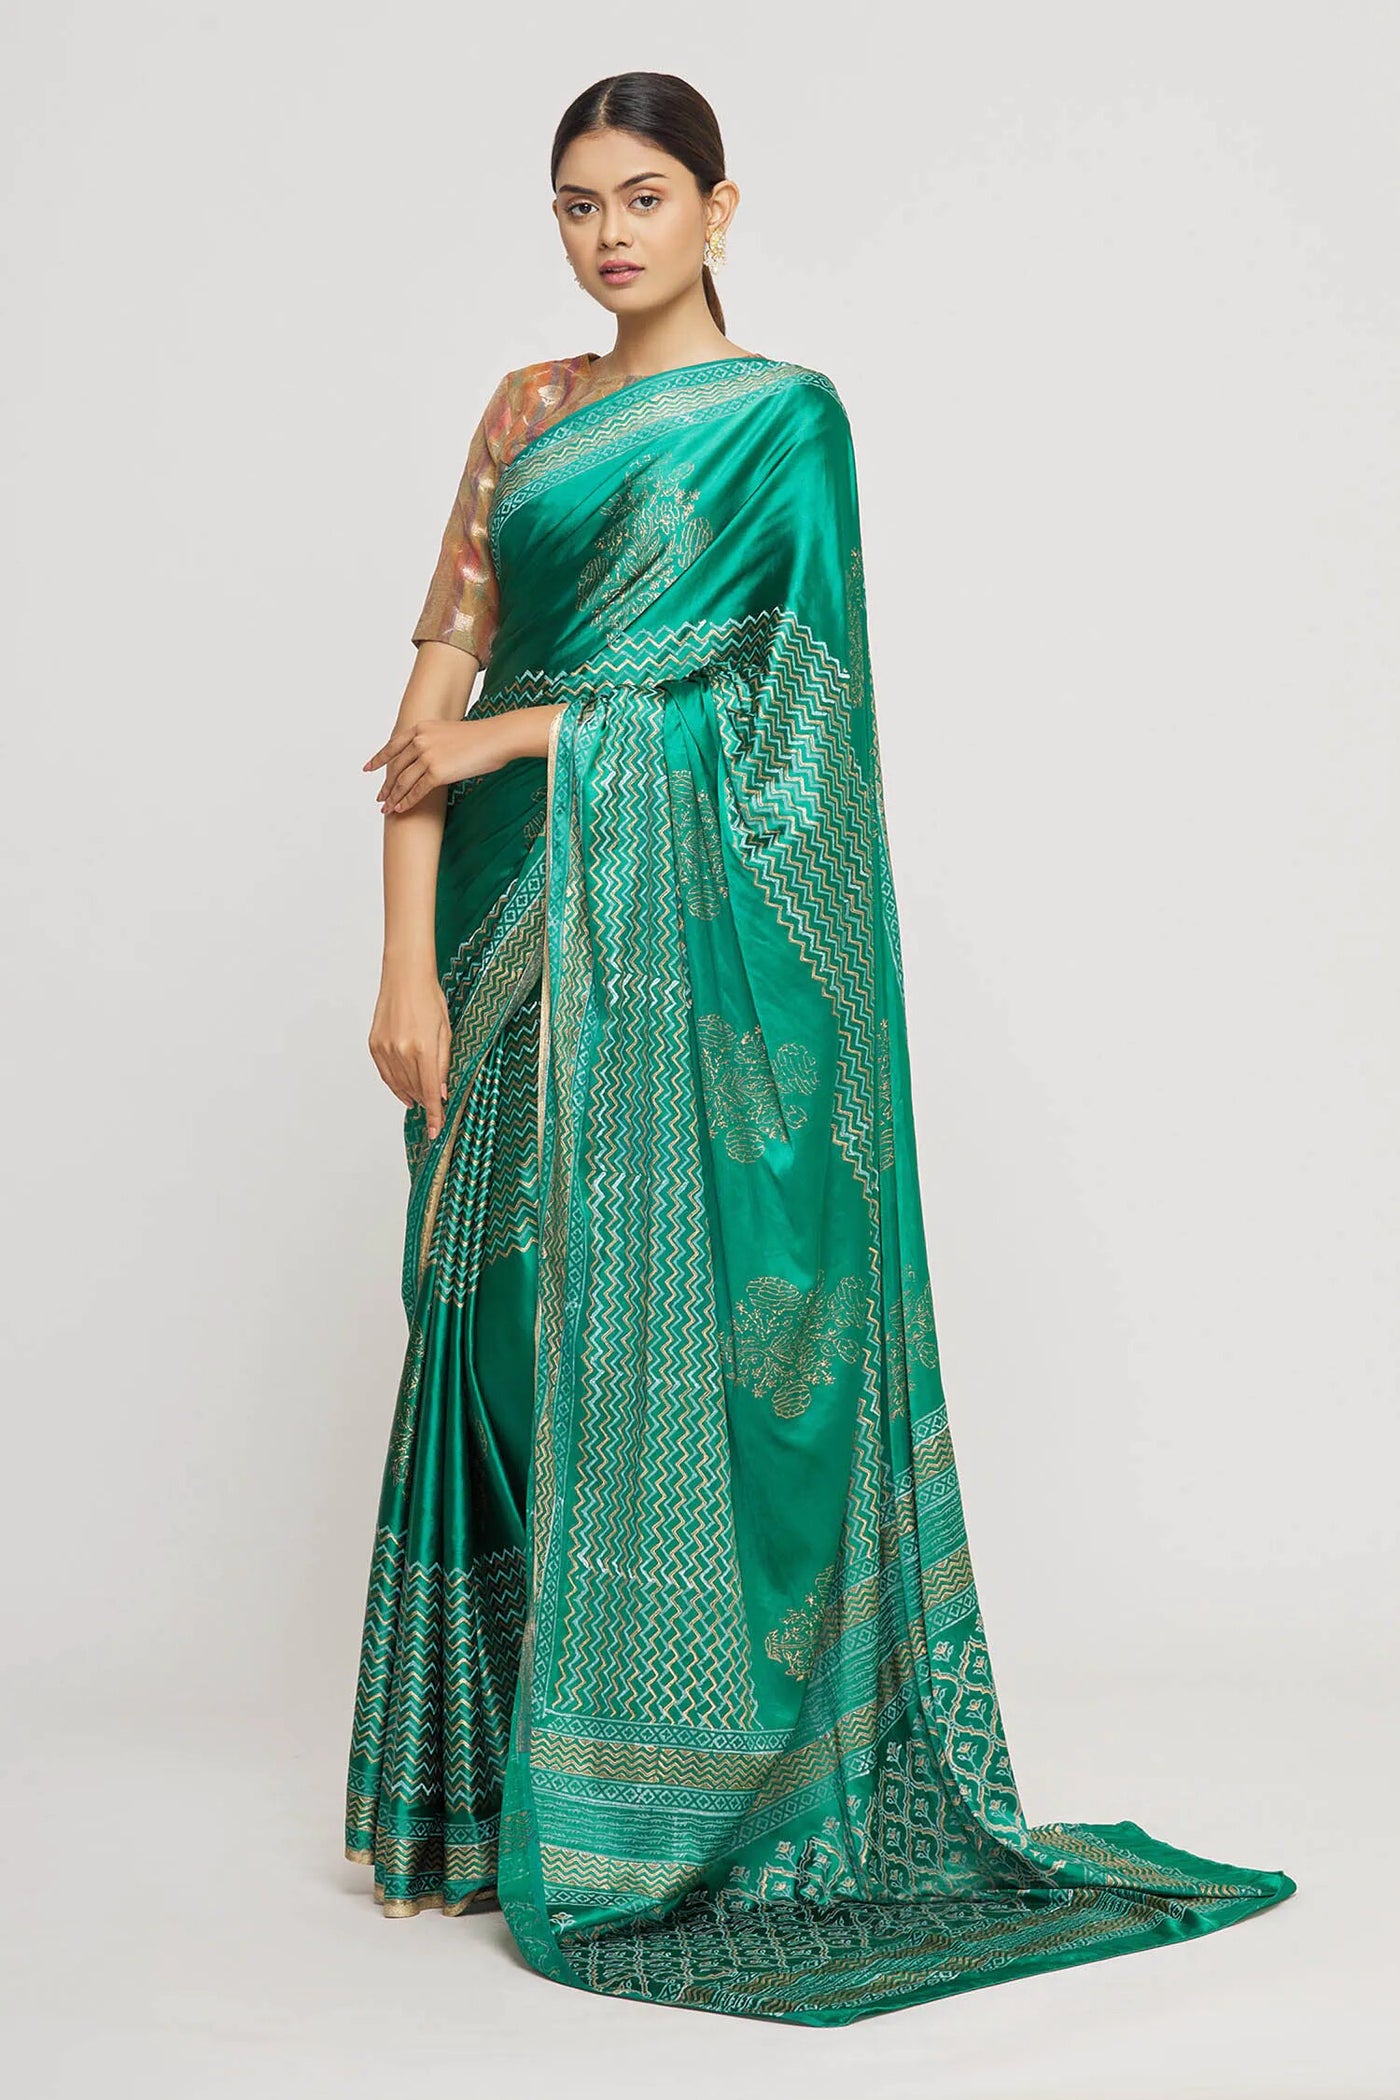 Green Madras Silk Saree - Indian Clothing in Denver, CO, Aurora, CO, Boulder, CO, Fort Collins, CO, Colorado Springs, CO, Parker, CO, Highlands Ranch, CO, Cherry Creek, CO, Centennial, CO, and Longmont, CO. Nationwide shipping USA - India Fashion X